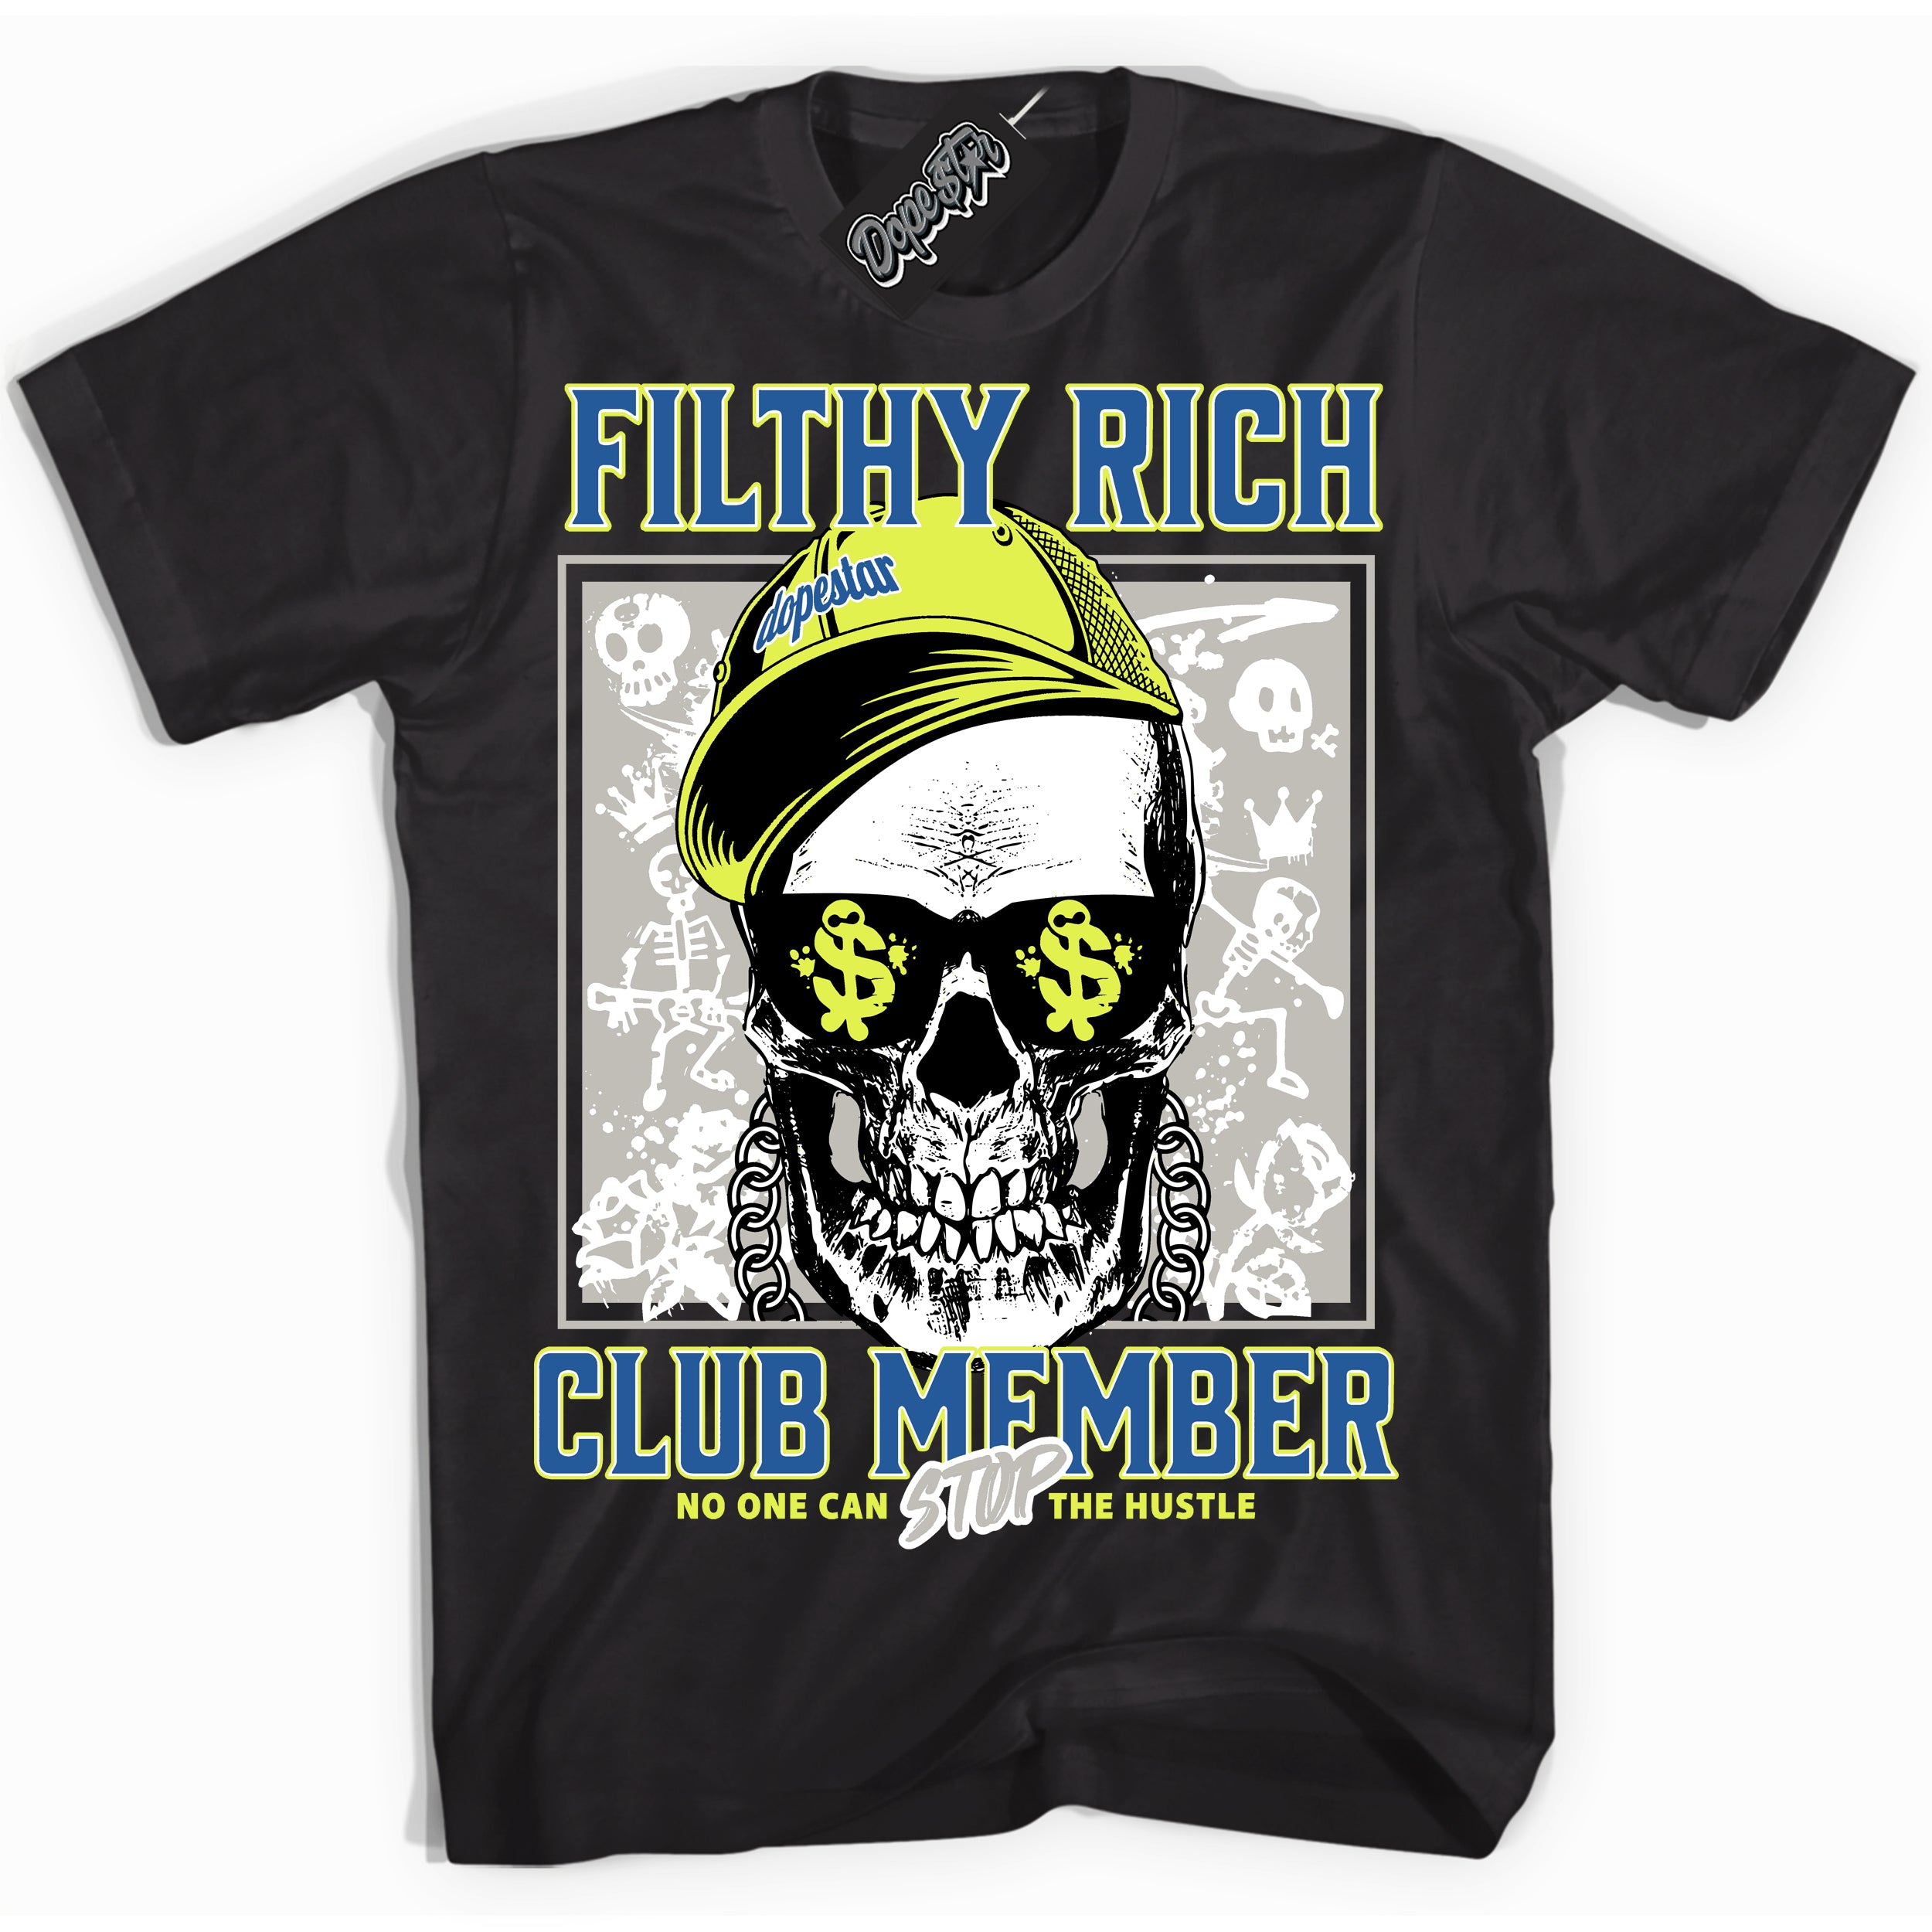 Cool Black Shirt with “ Filthy Rich” design that perfectly matches '86 Air Max Day 1s Sneakers.